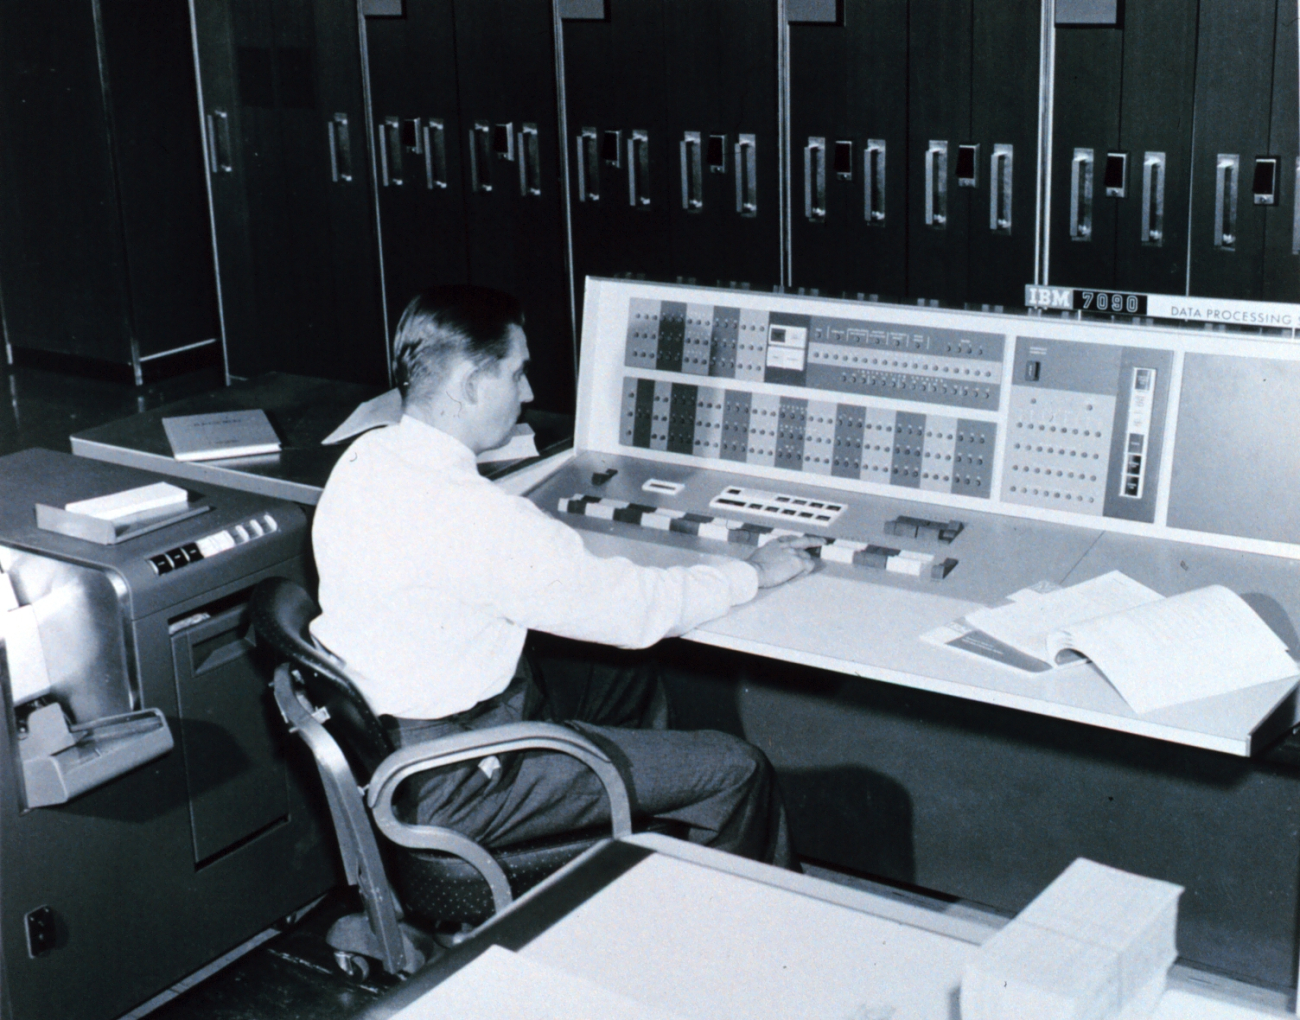 A meteorologist at the console of the IBM 7090 electronic computer in theJoint Numerical Weather Prediction Unit